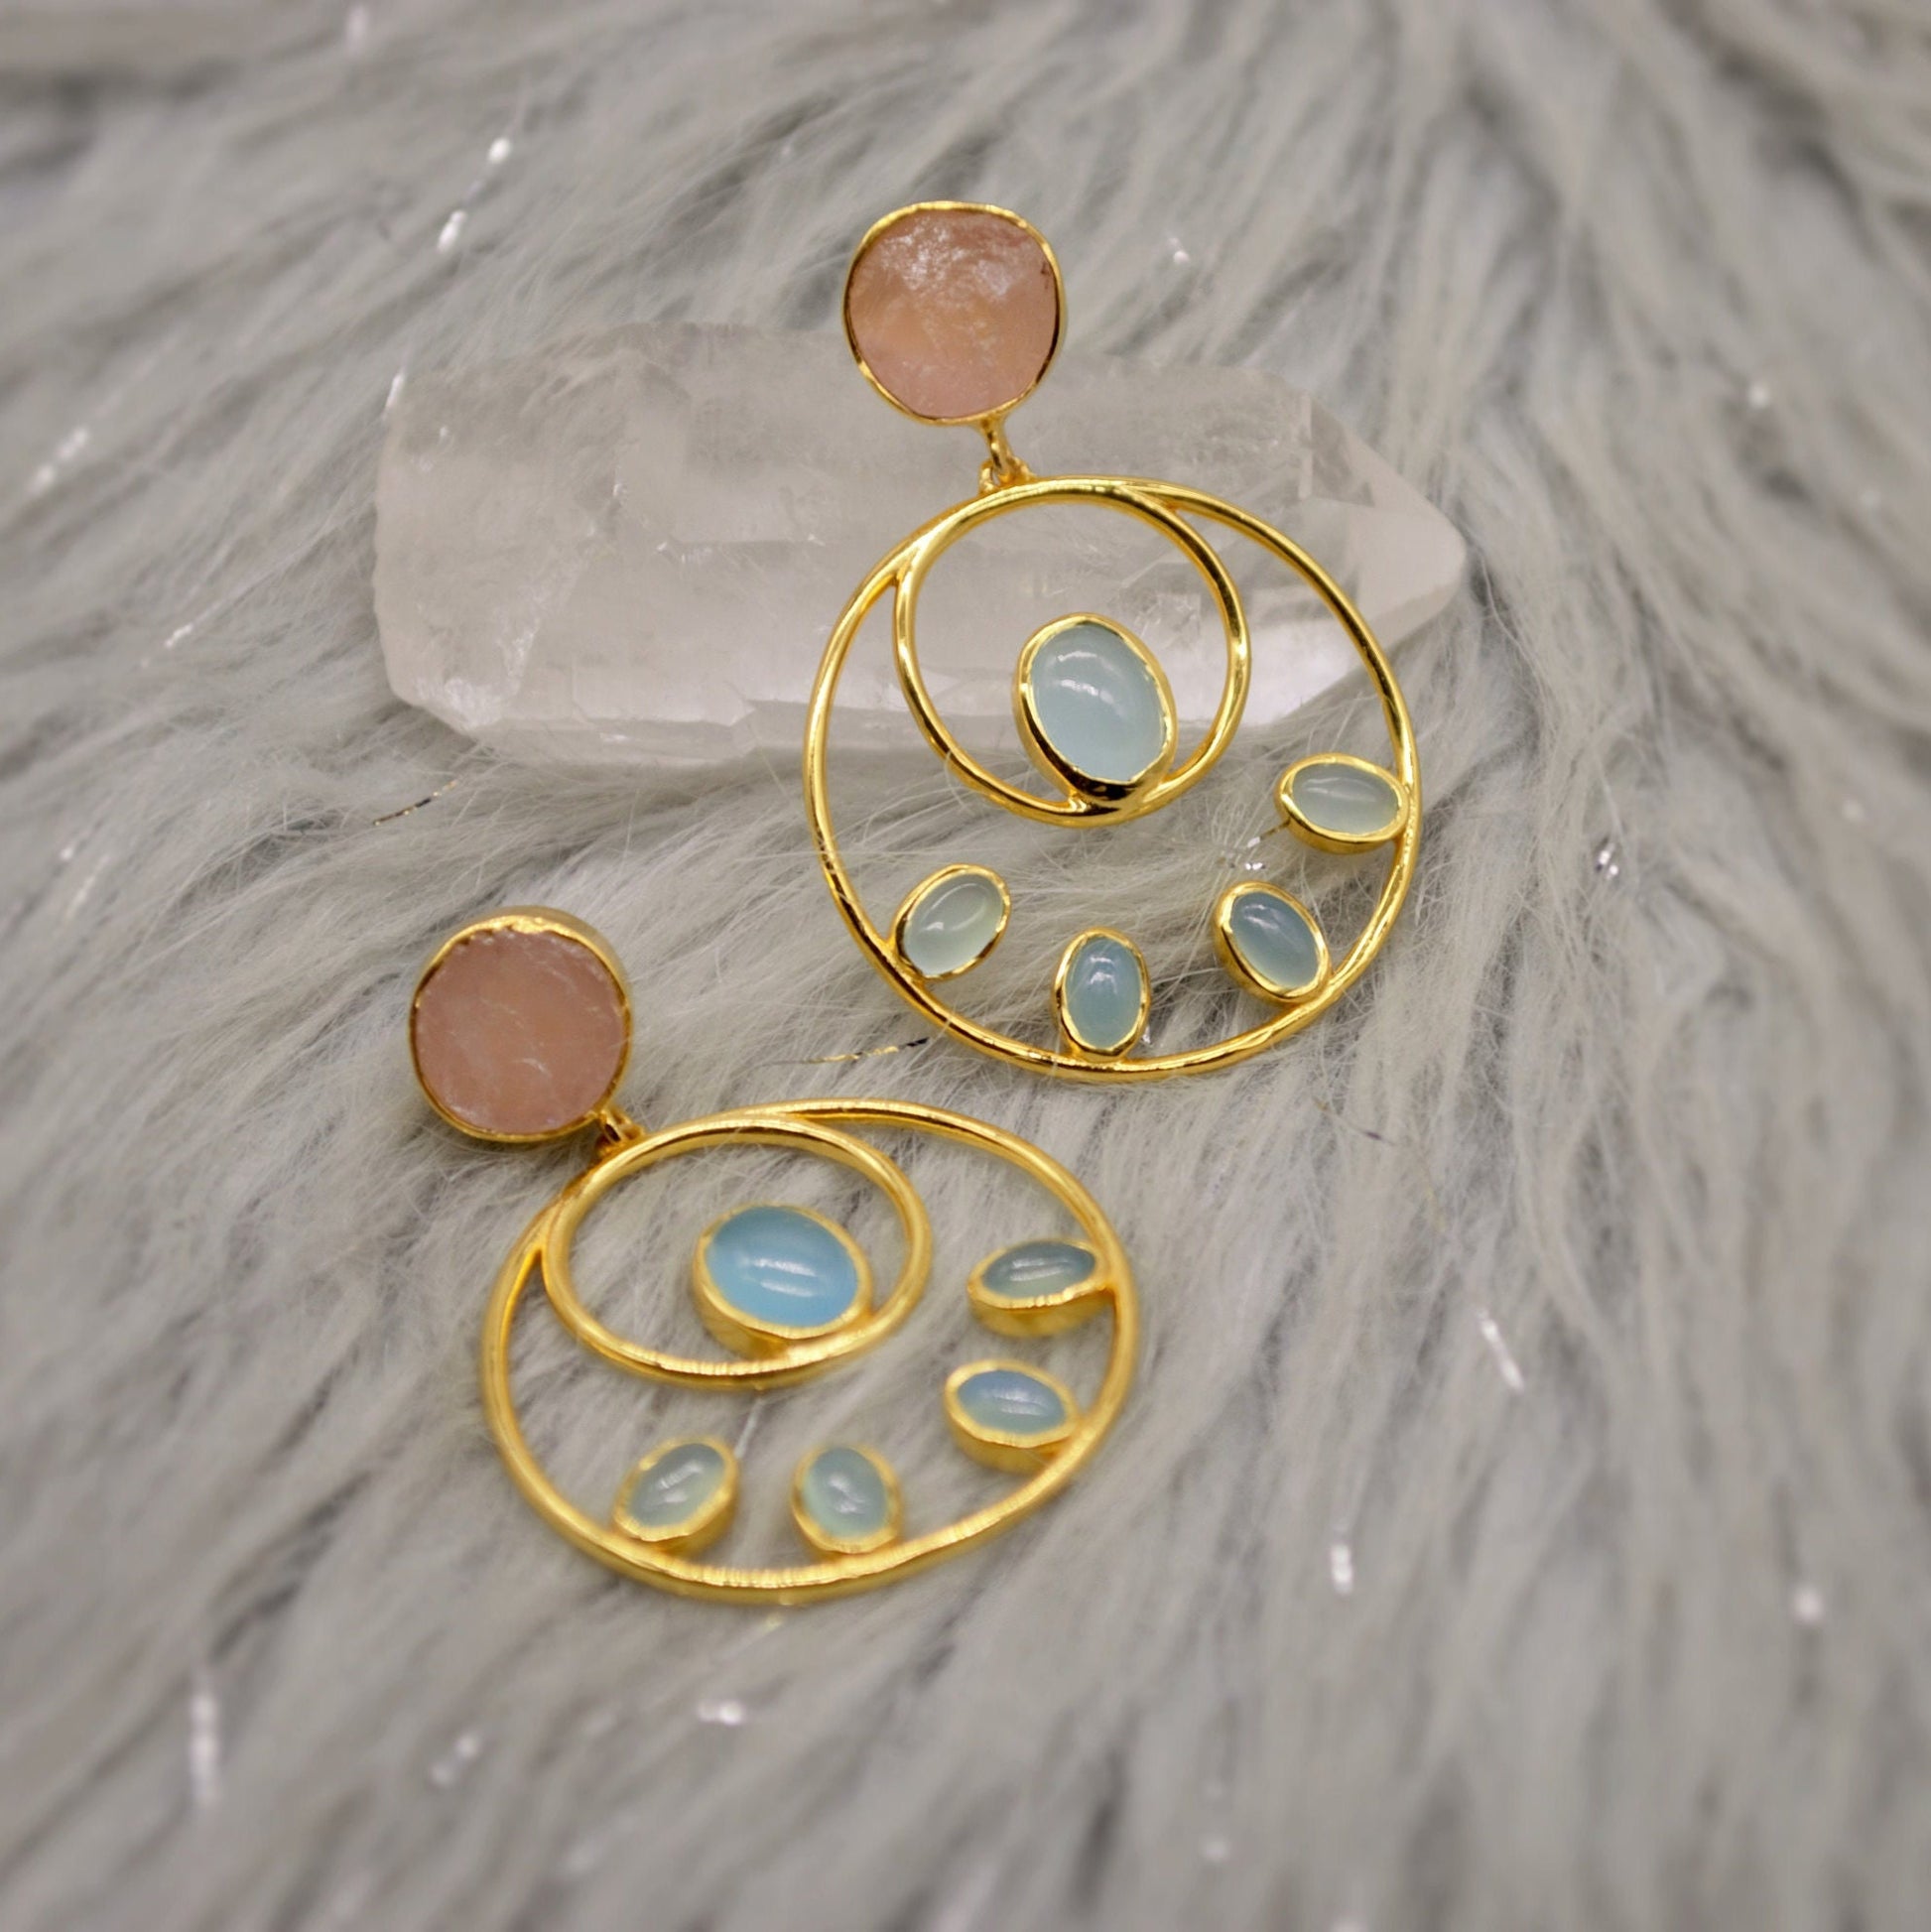 Rose Quartz, Aqua Blue Chalcedony Earrings, Gold Plated Sterling Silver Gemstone Earrings, Unique Hoops, Birthday Gifts For Her